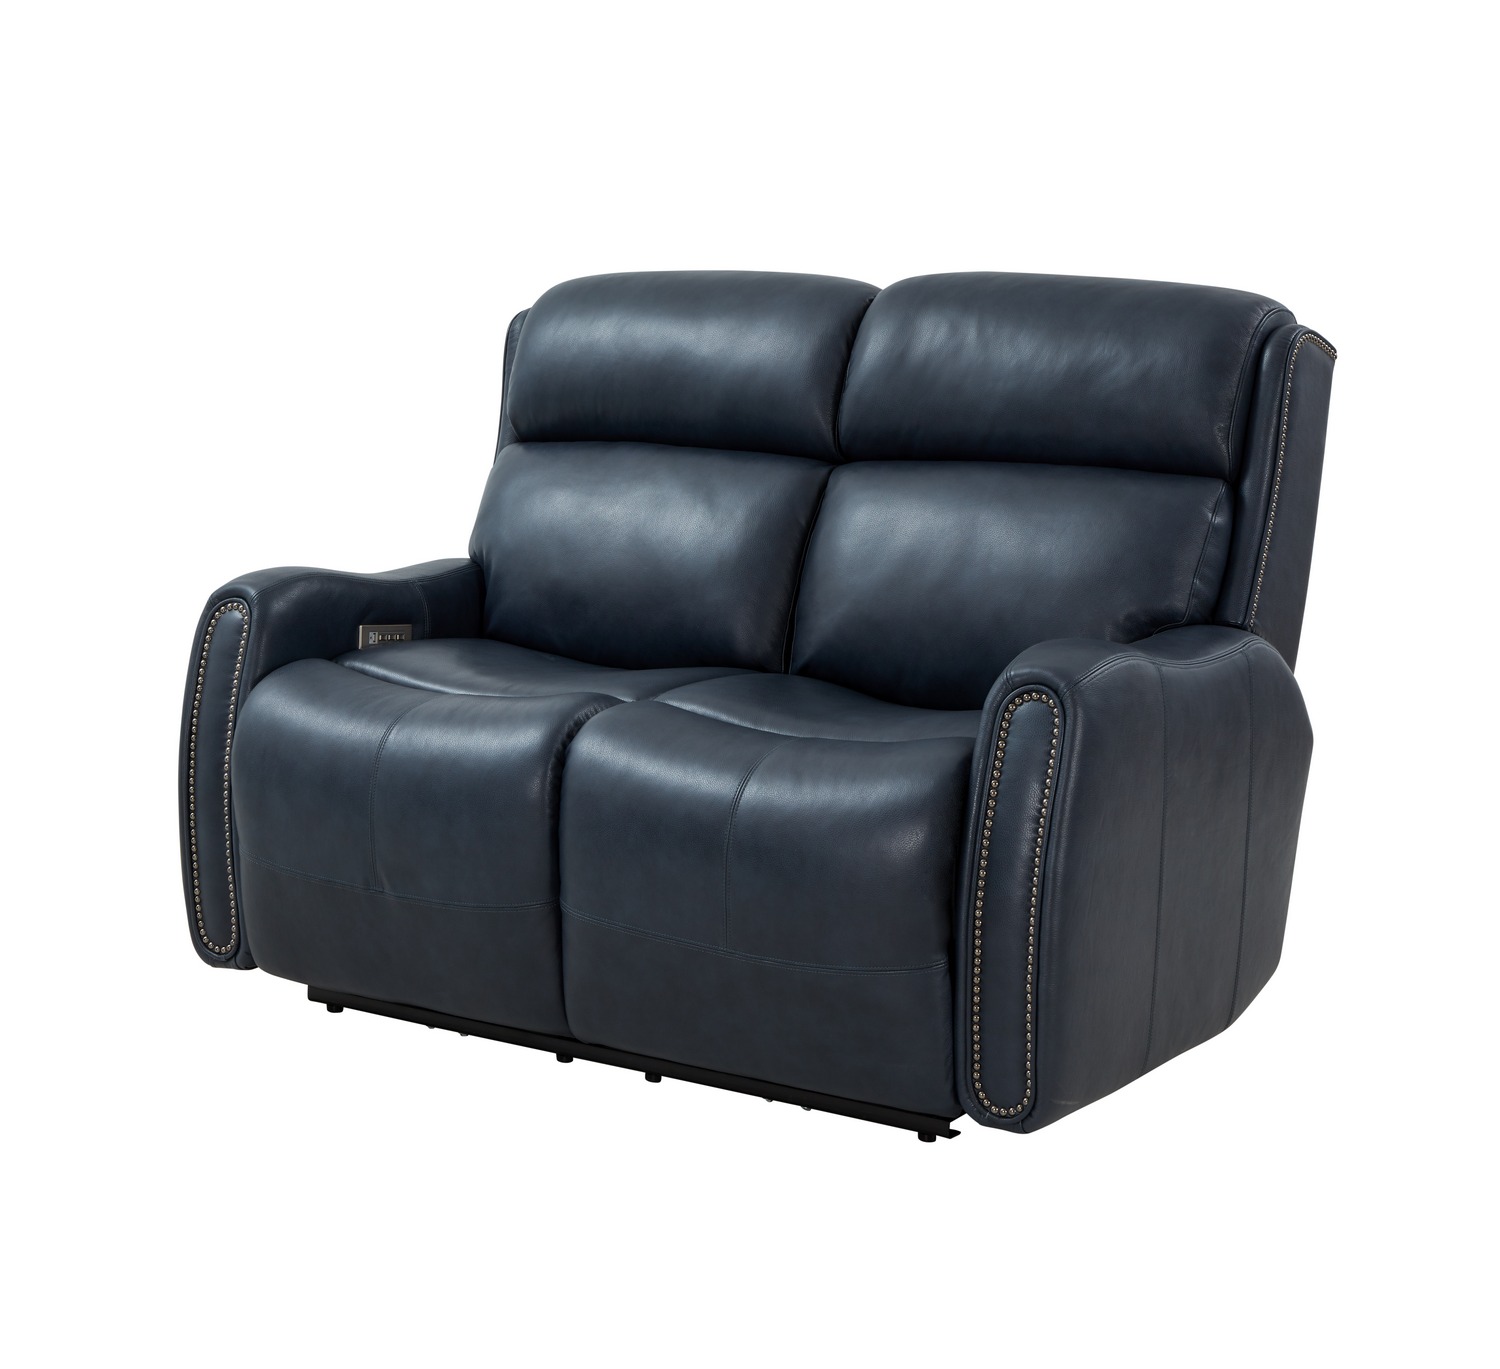 Barcalounger Brookside Power Reclining Loveseat with Power Head Rests and Power Lumbar - Barone Navy Blue/All Leather